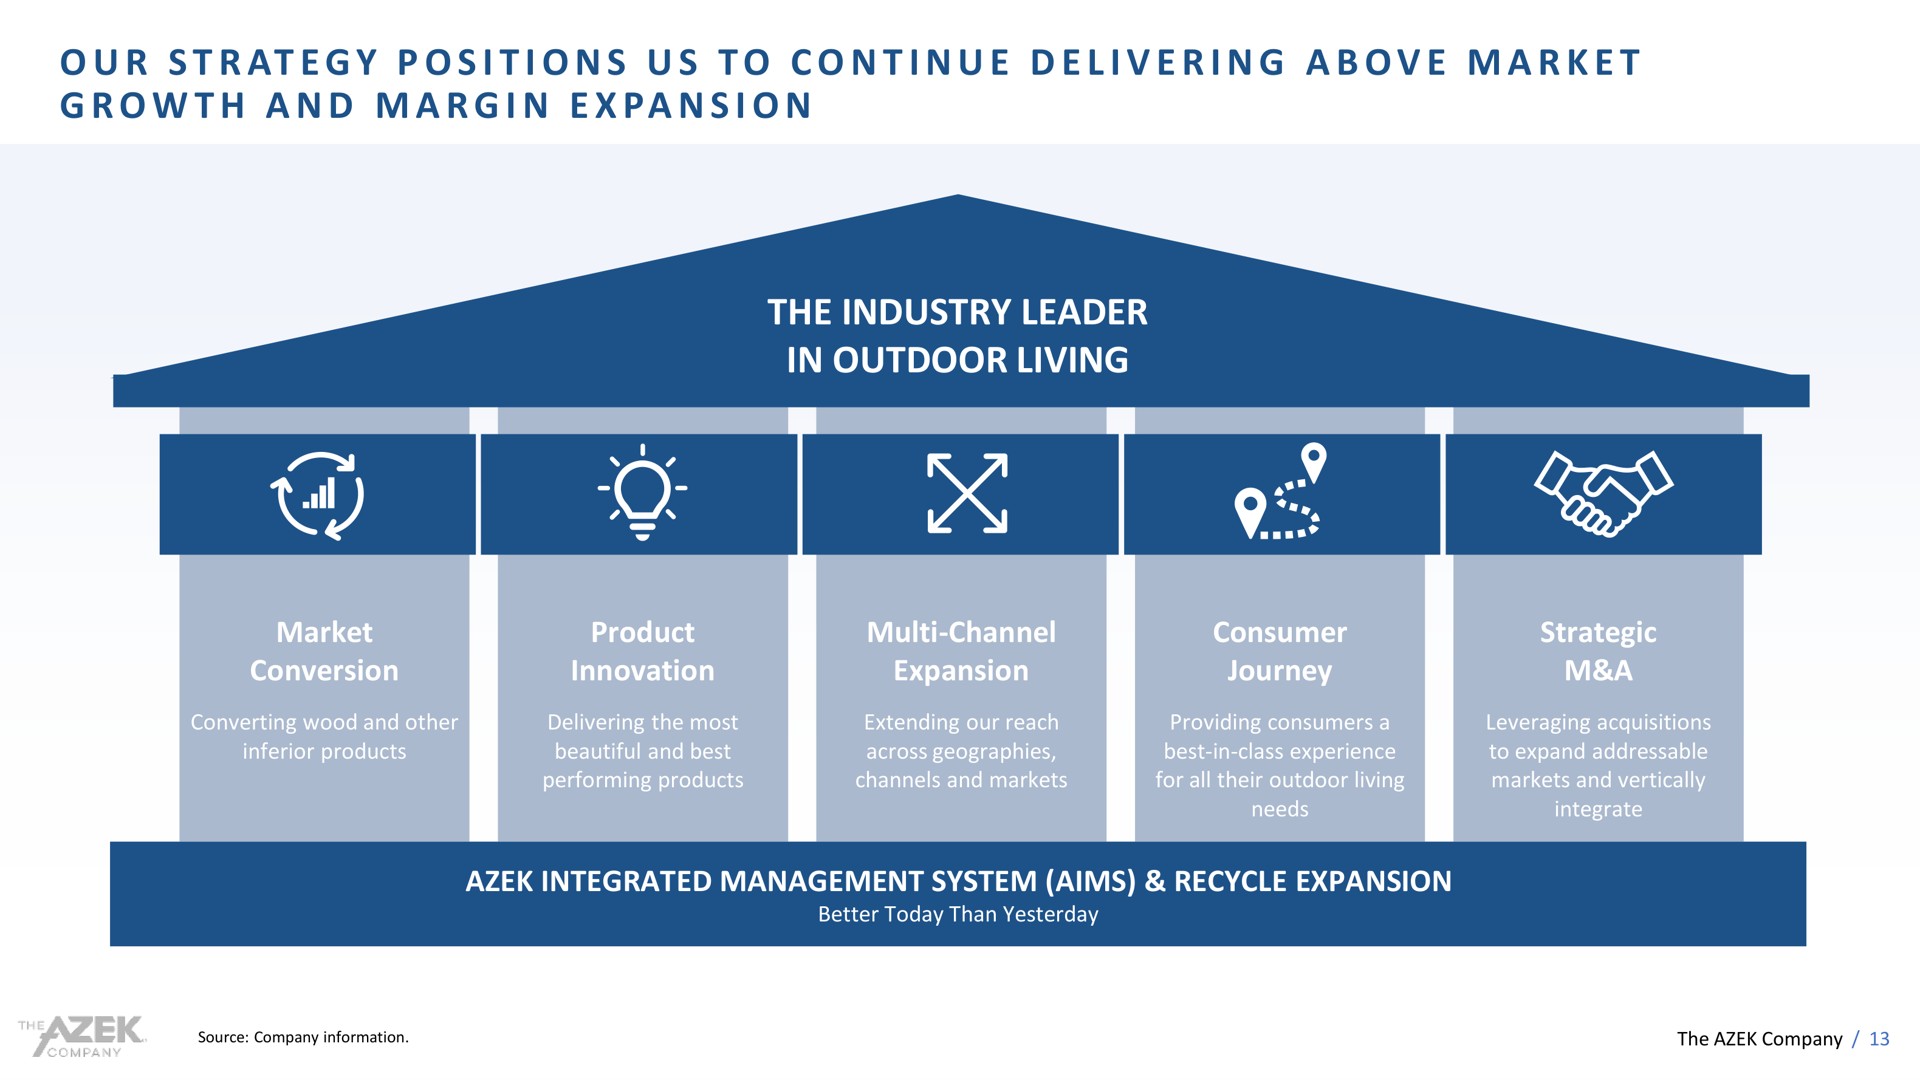 at i i i i i a a a a i i the industry leader in outdoor living our strategy positions us to continue delivering above market growth and margin expansion | Azek